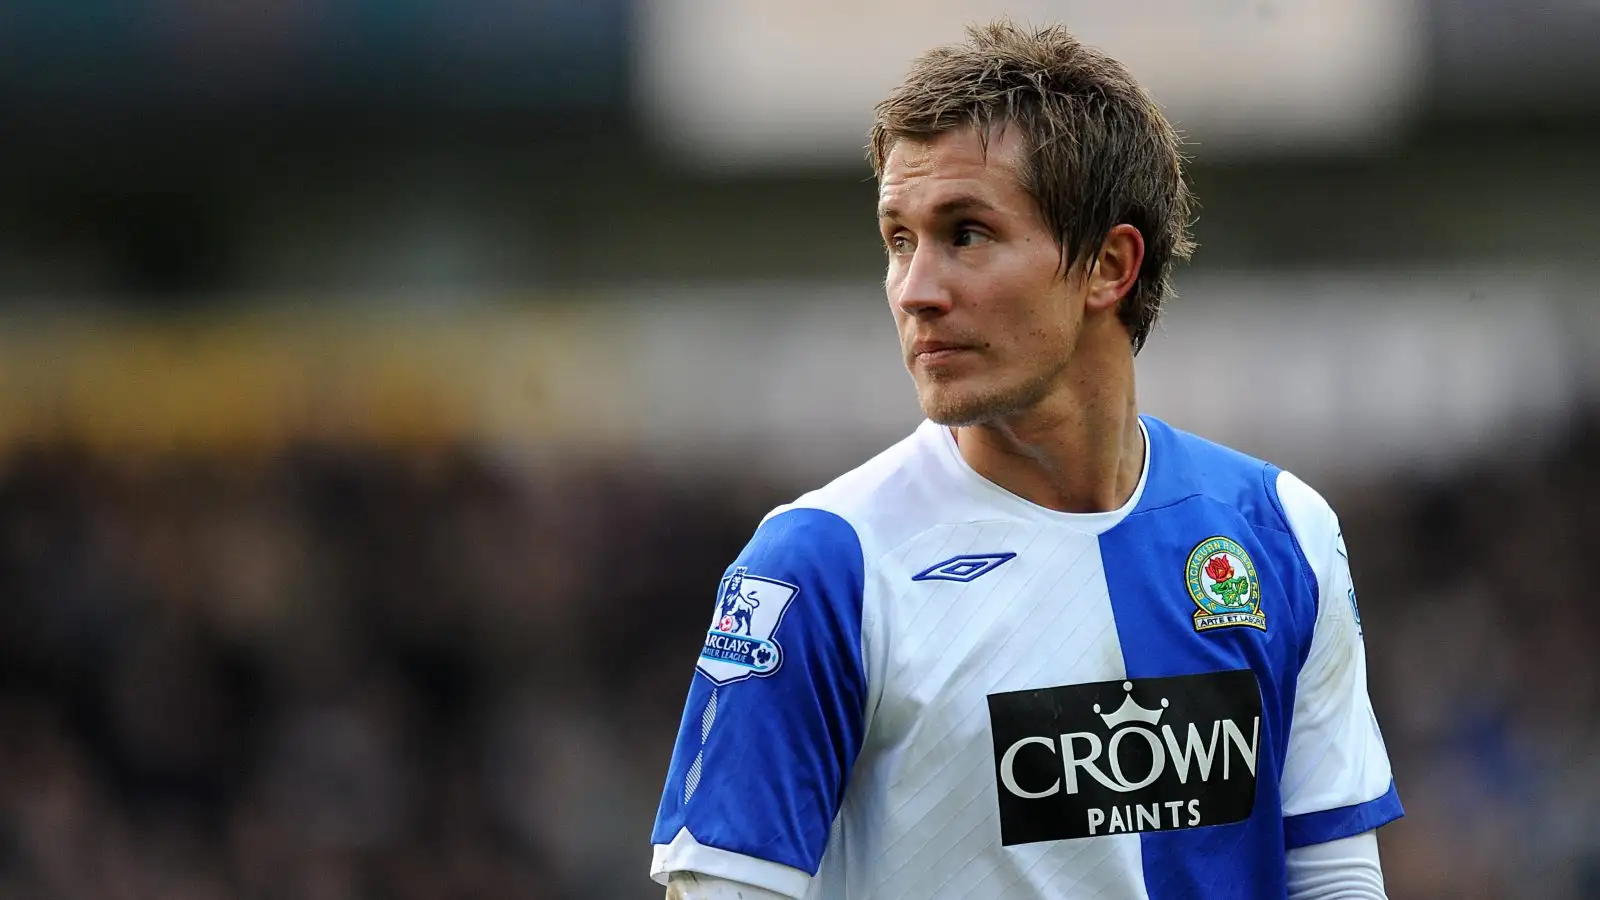 Morten Gamst Pedersen is alive, well, and scoring goals from corners in honour of the streets